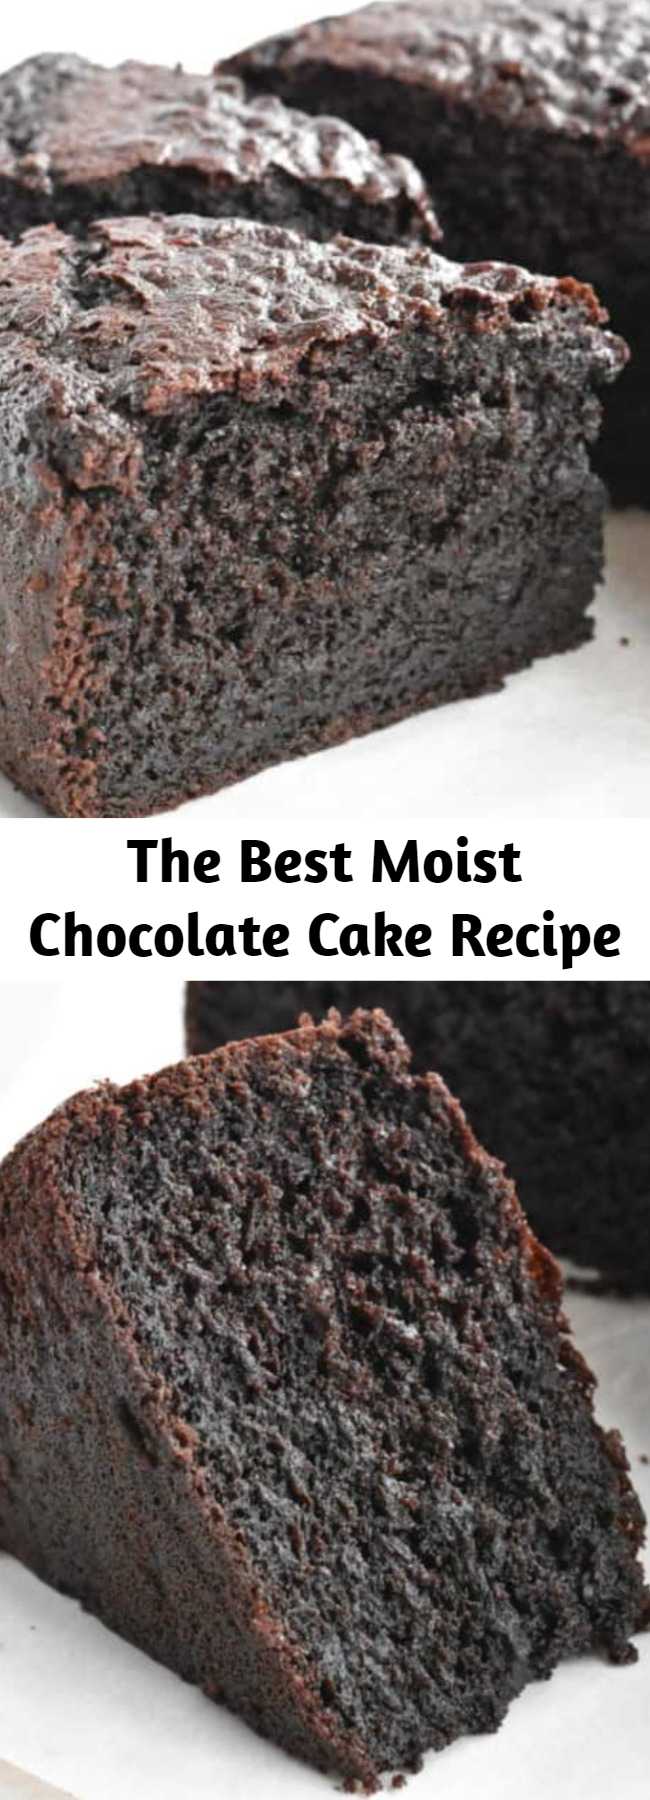 The Best Moist Chocolate Cake Recipe - It doesn't get much better than this ultra moist and rich chocolate cake! This is my go-to chocolate cake recipe for birthdays, dinner parties or just to enjoy. This cake only needs one bowl and no electric mixer.